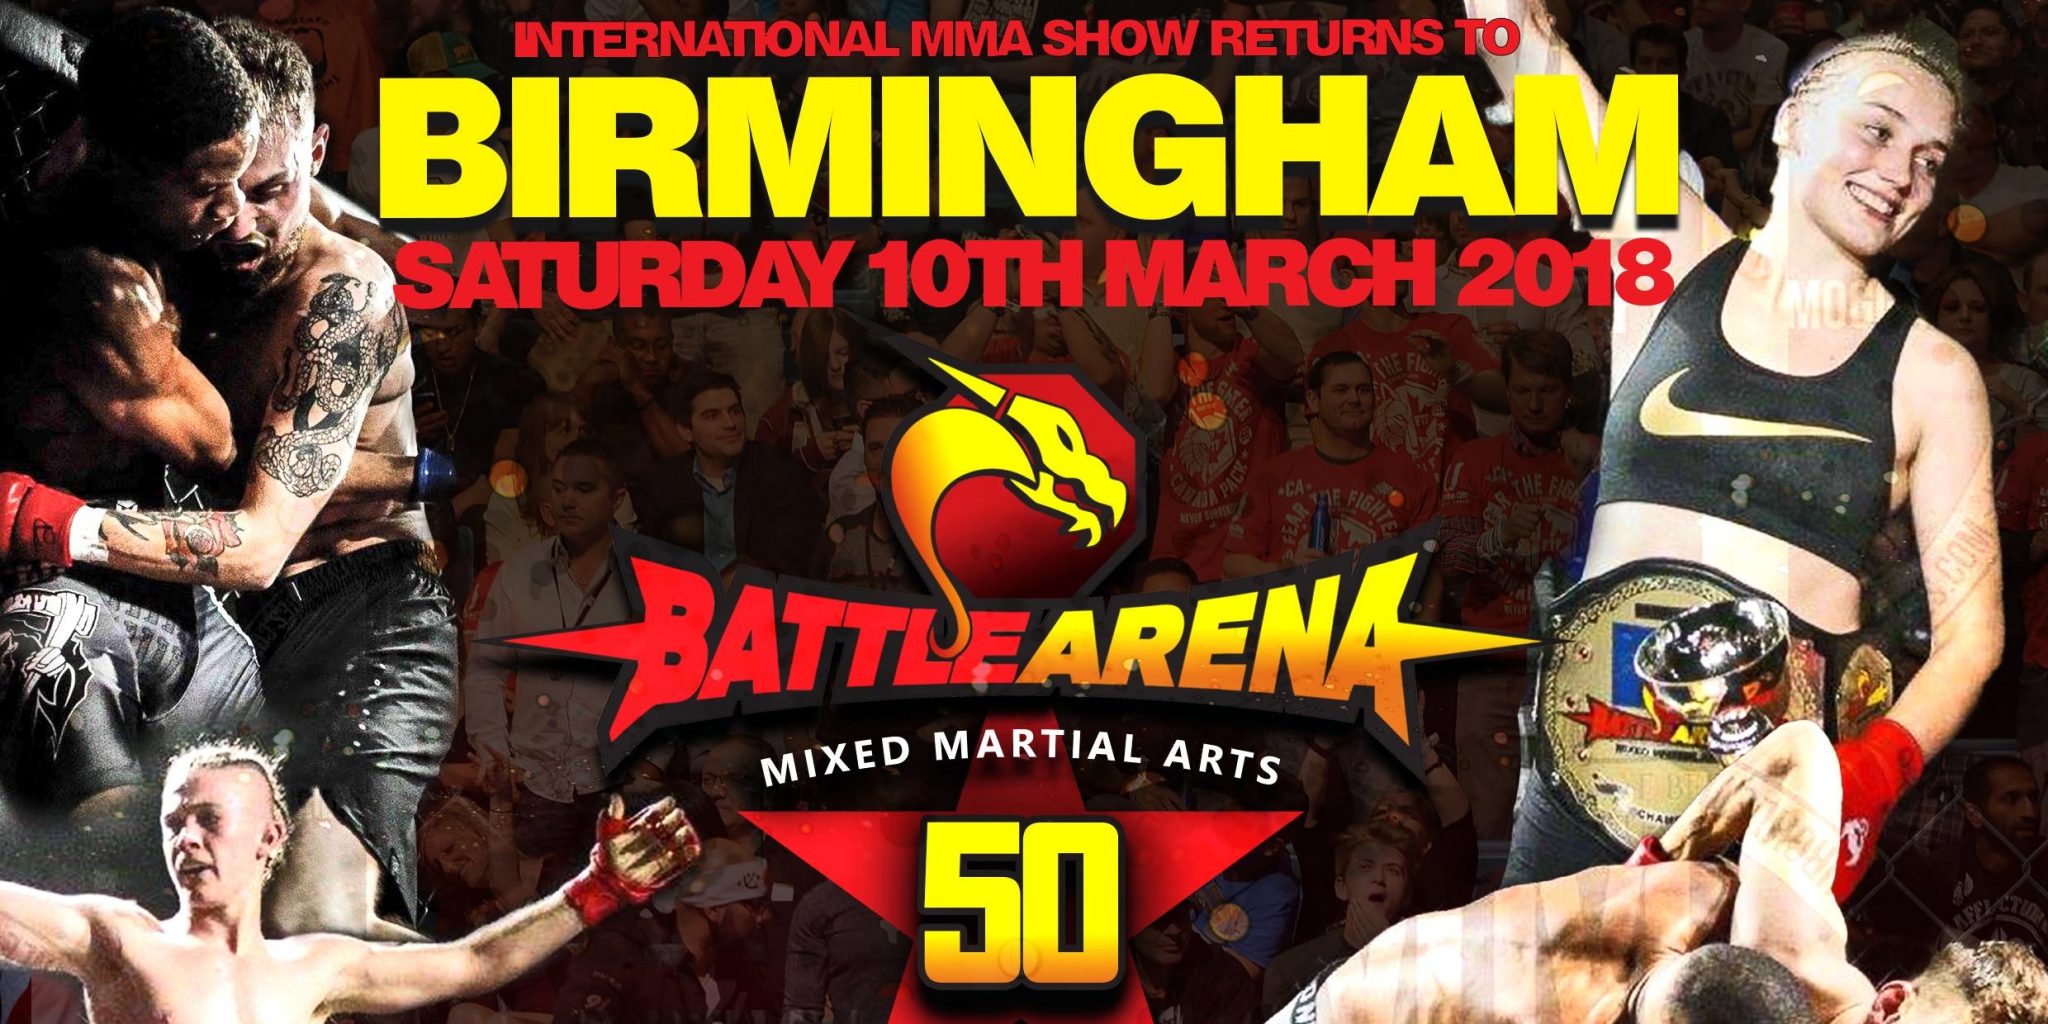 Watch the FREE replay of Battle Arena 50 from Birmingham England